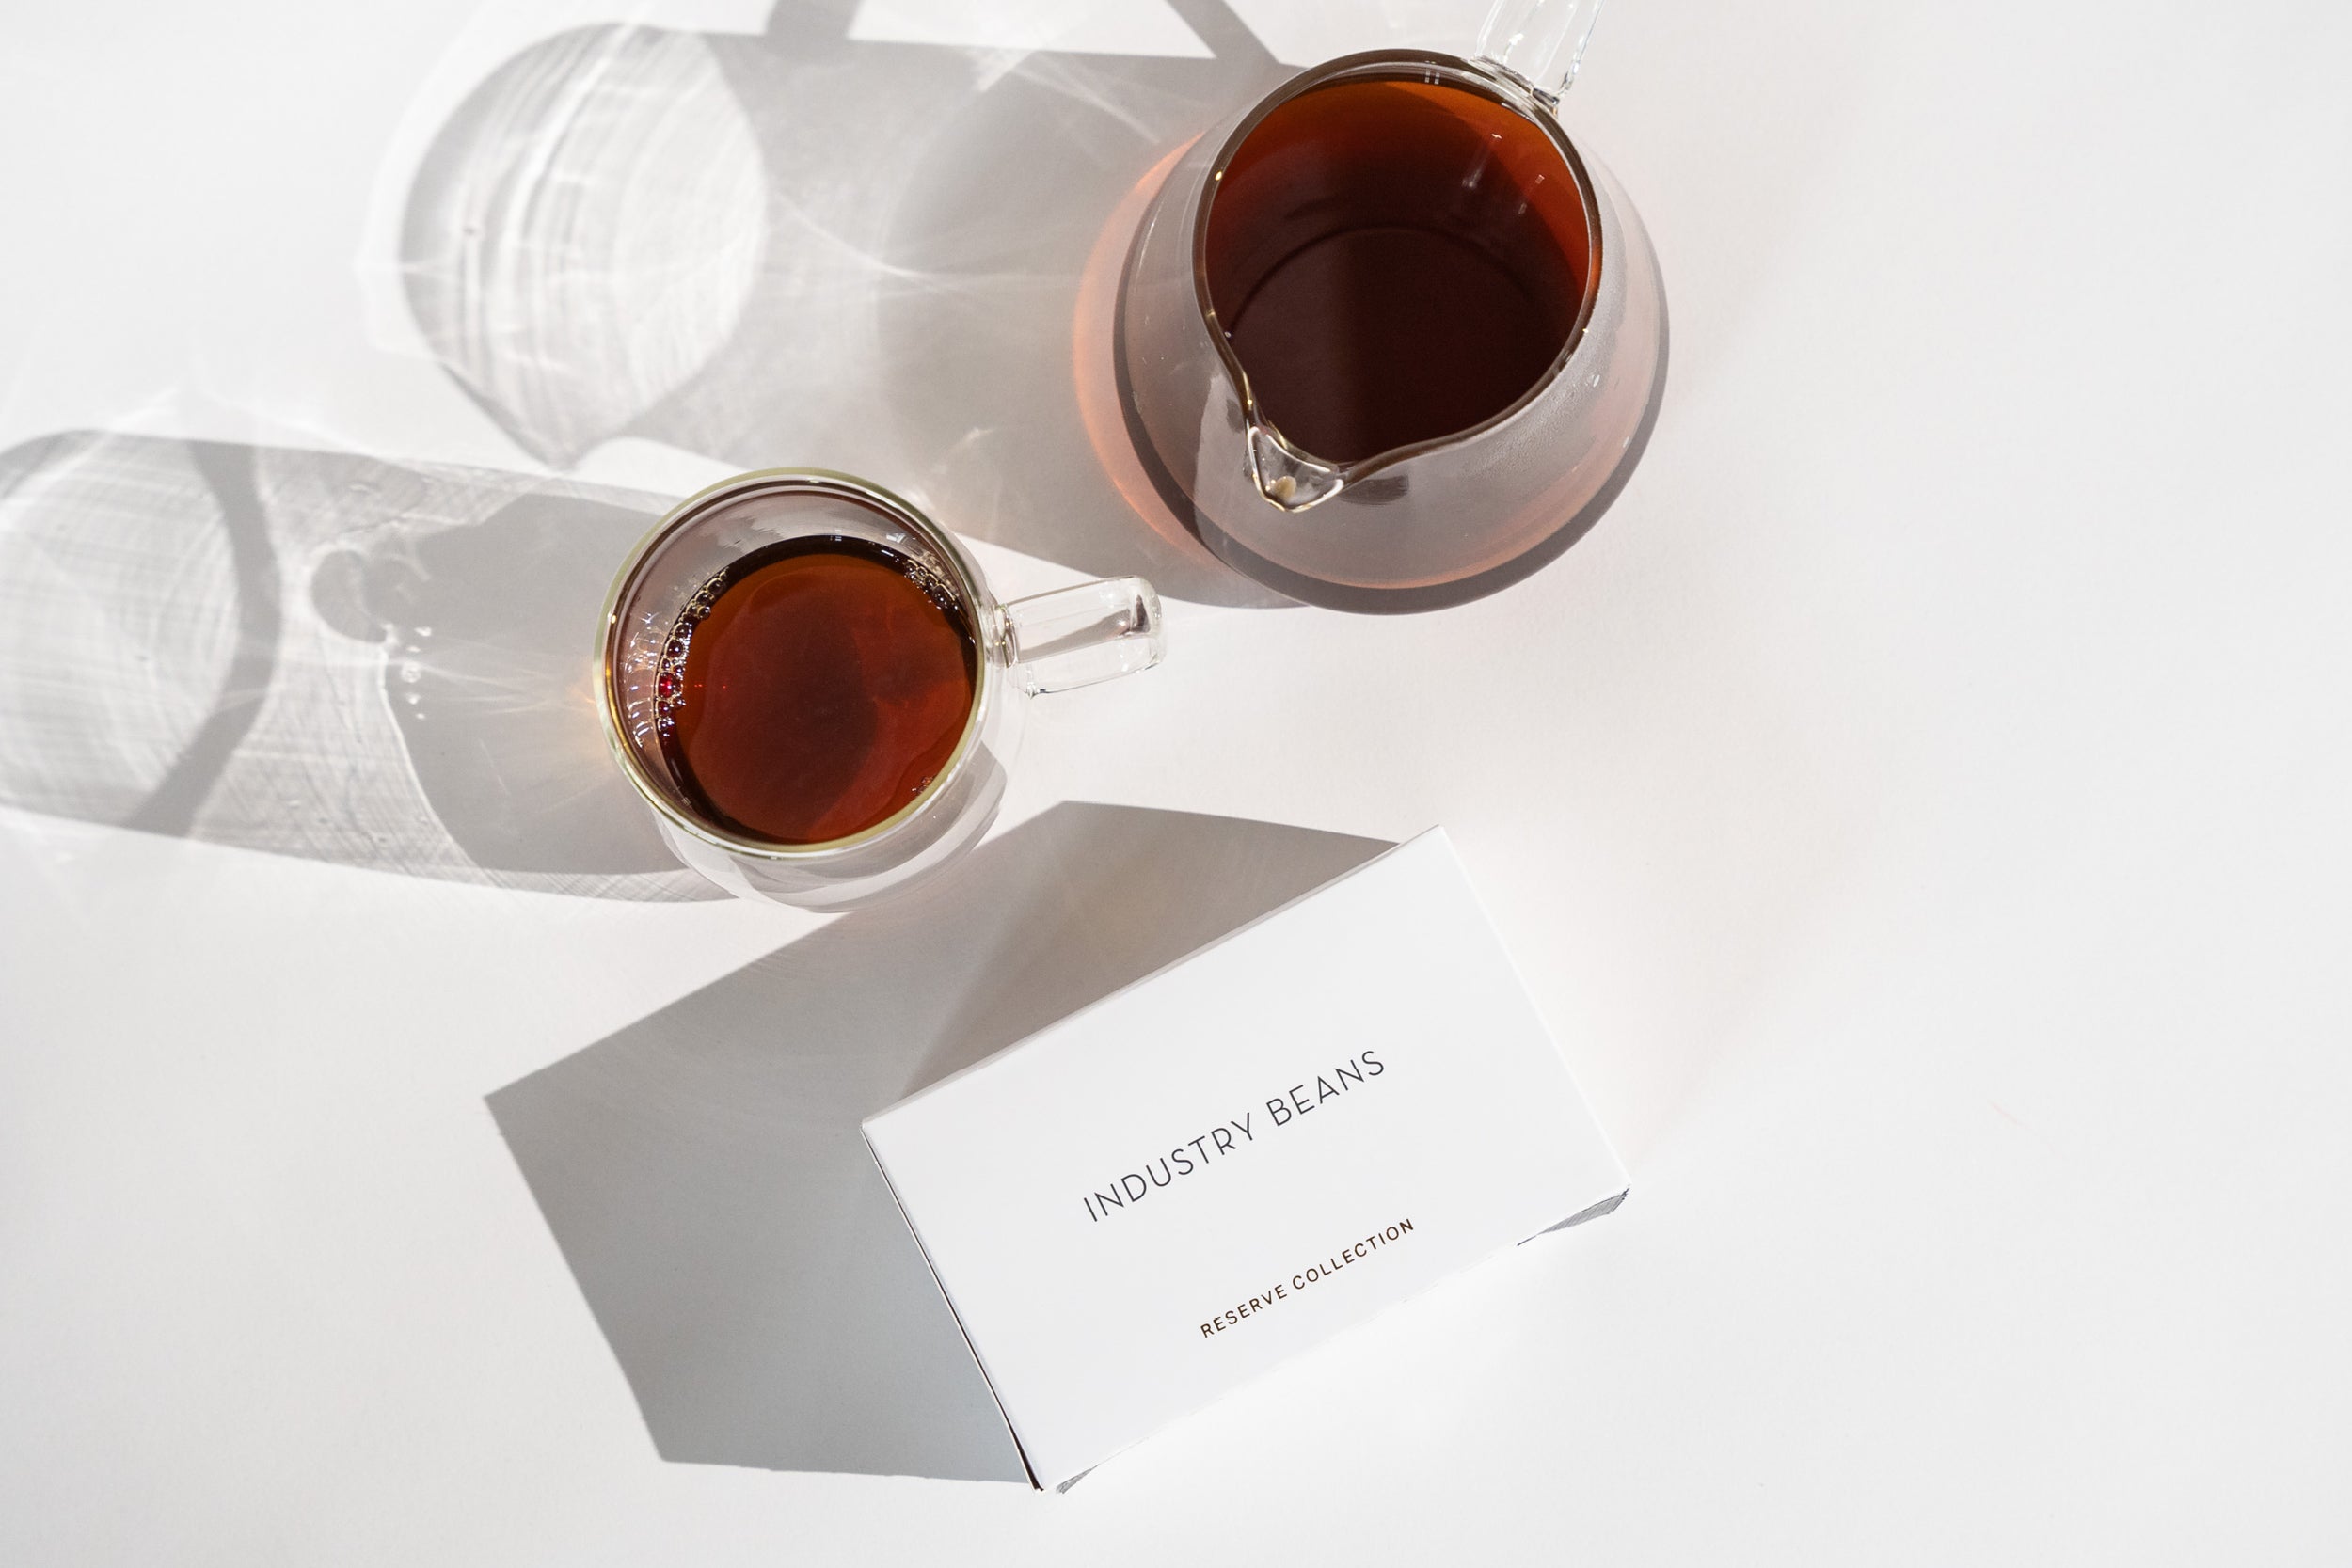 Reserve Collection: Two Rare and Limited Coffees